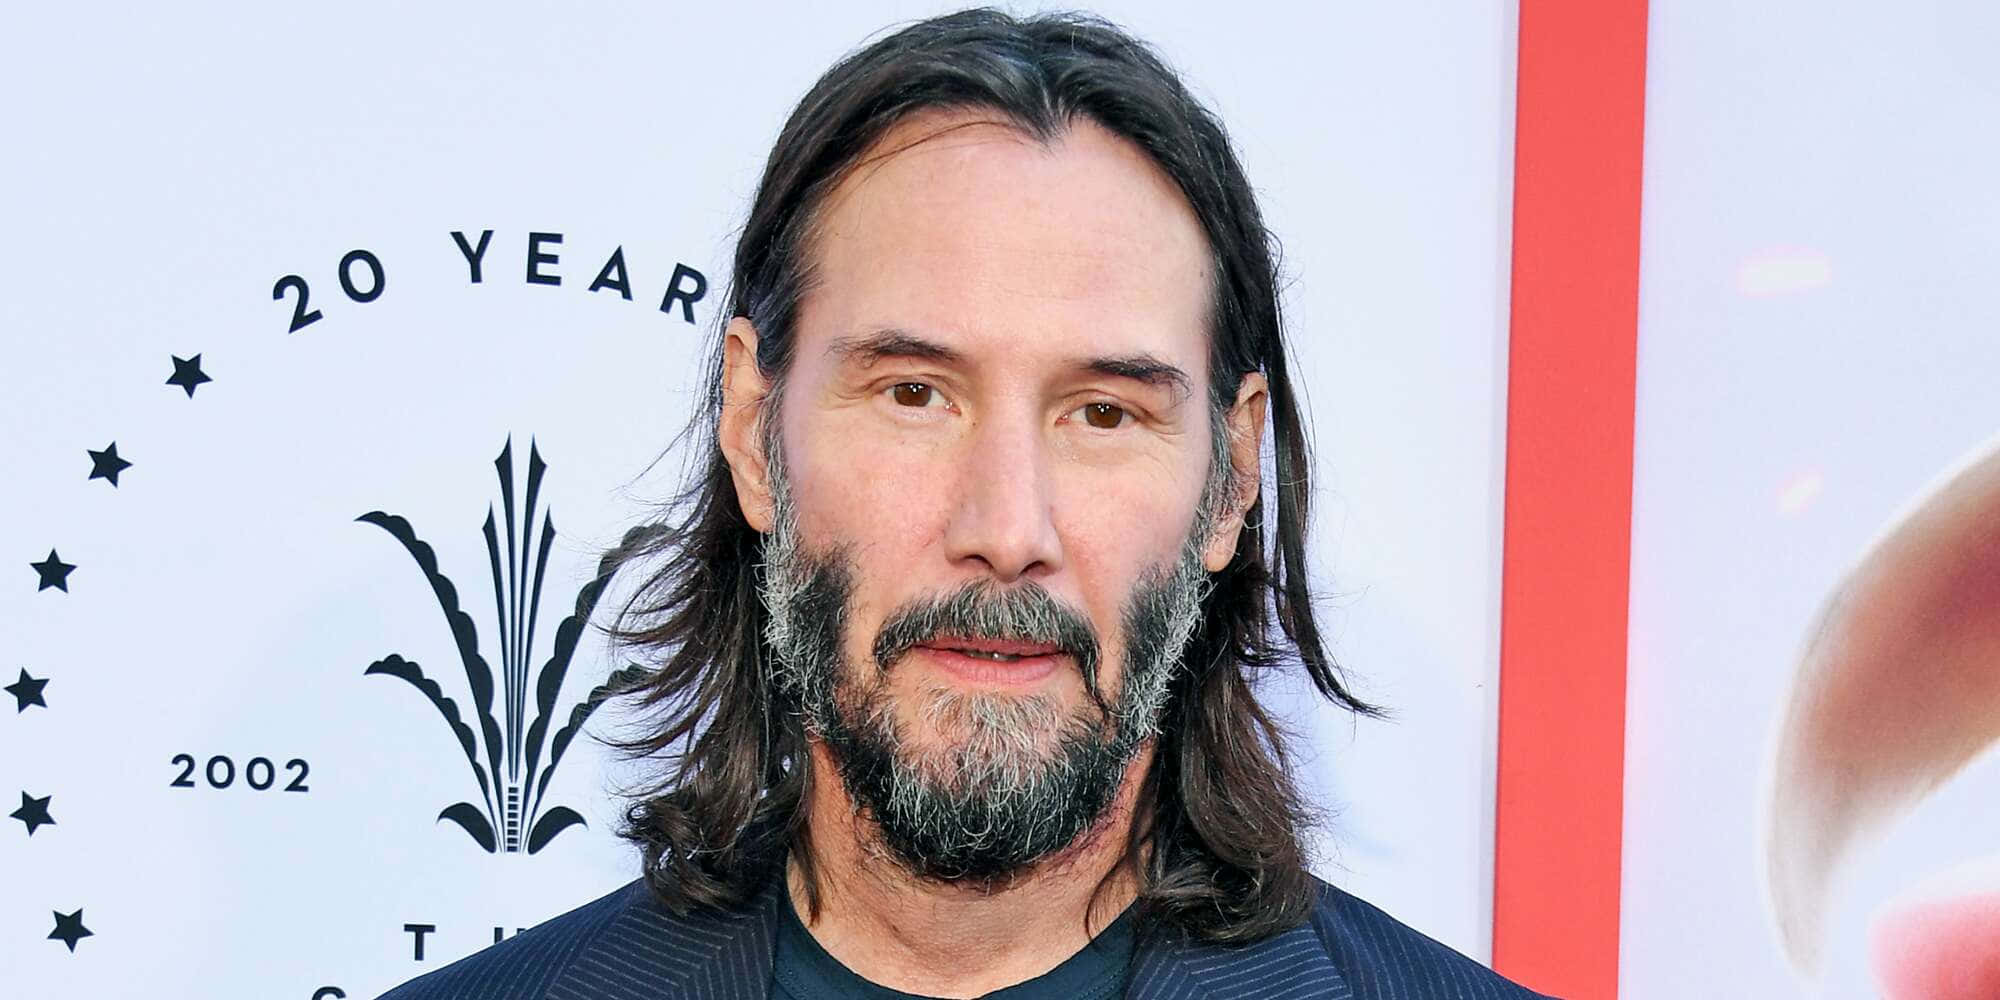 Keanu Reeves's Intense Stare